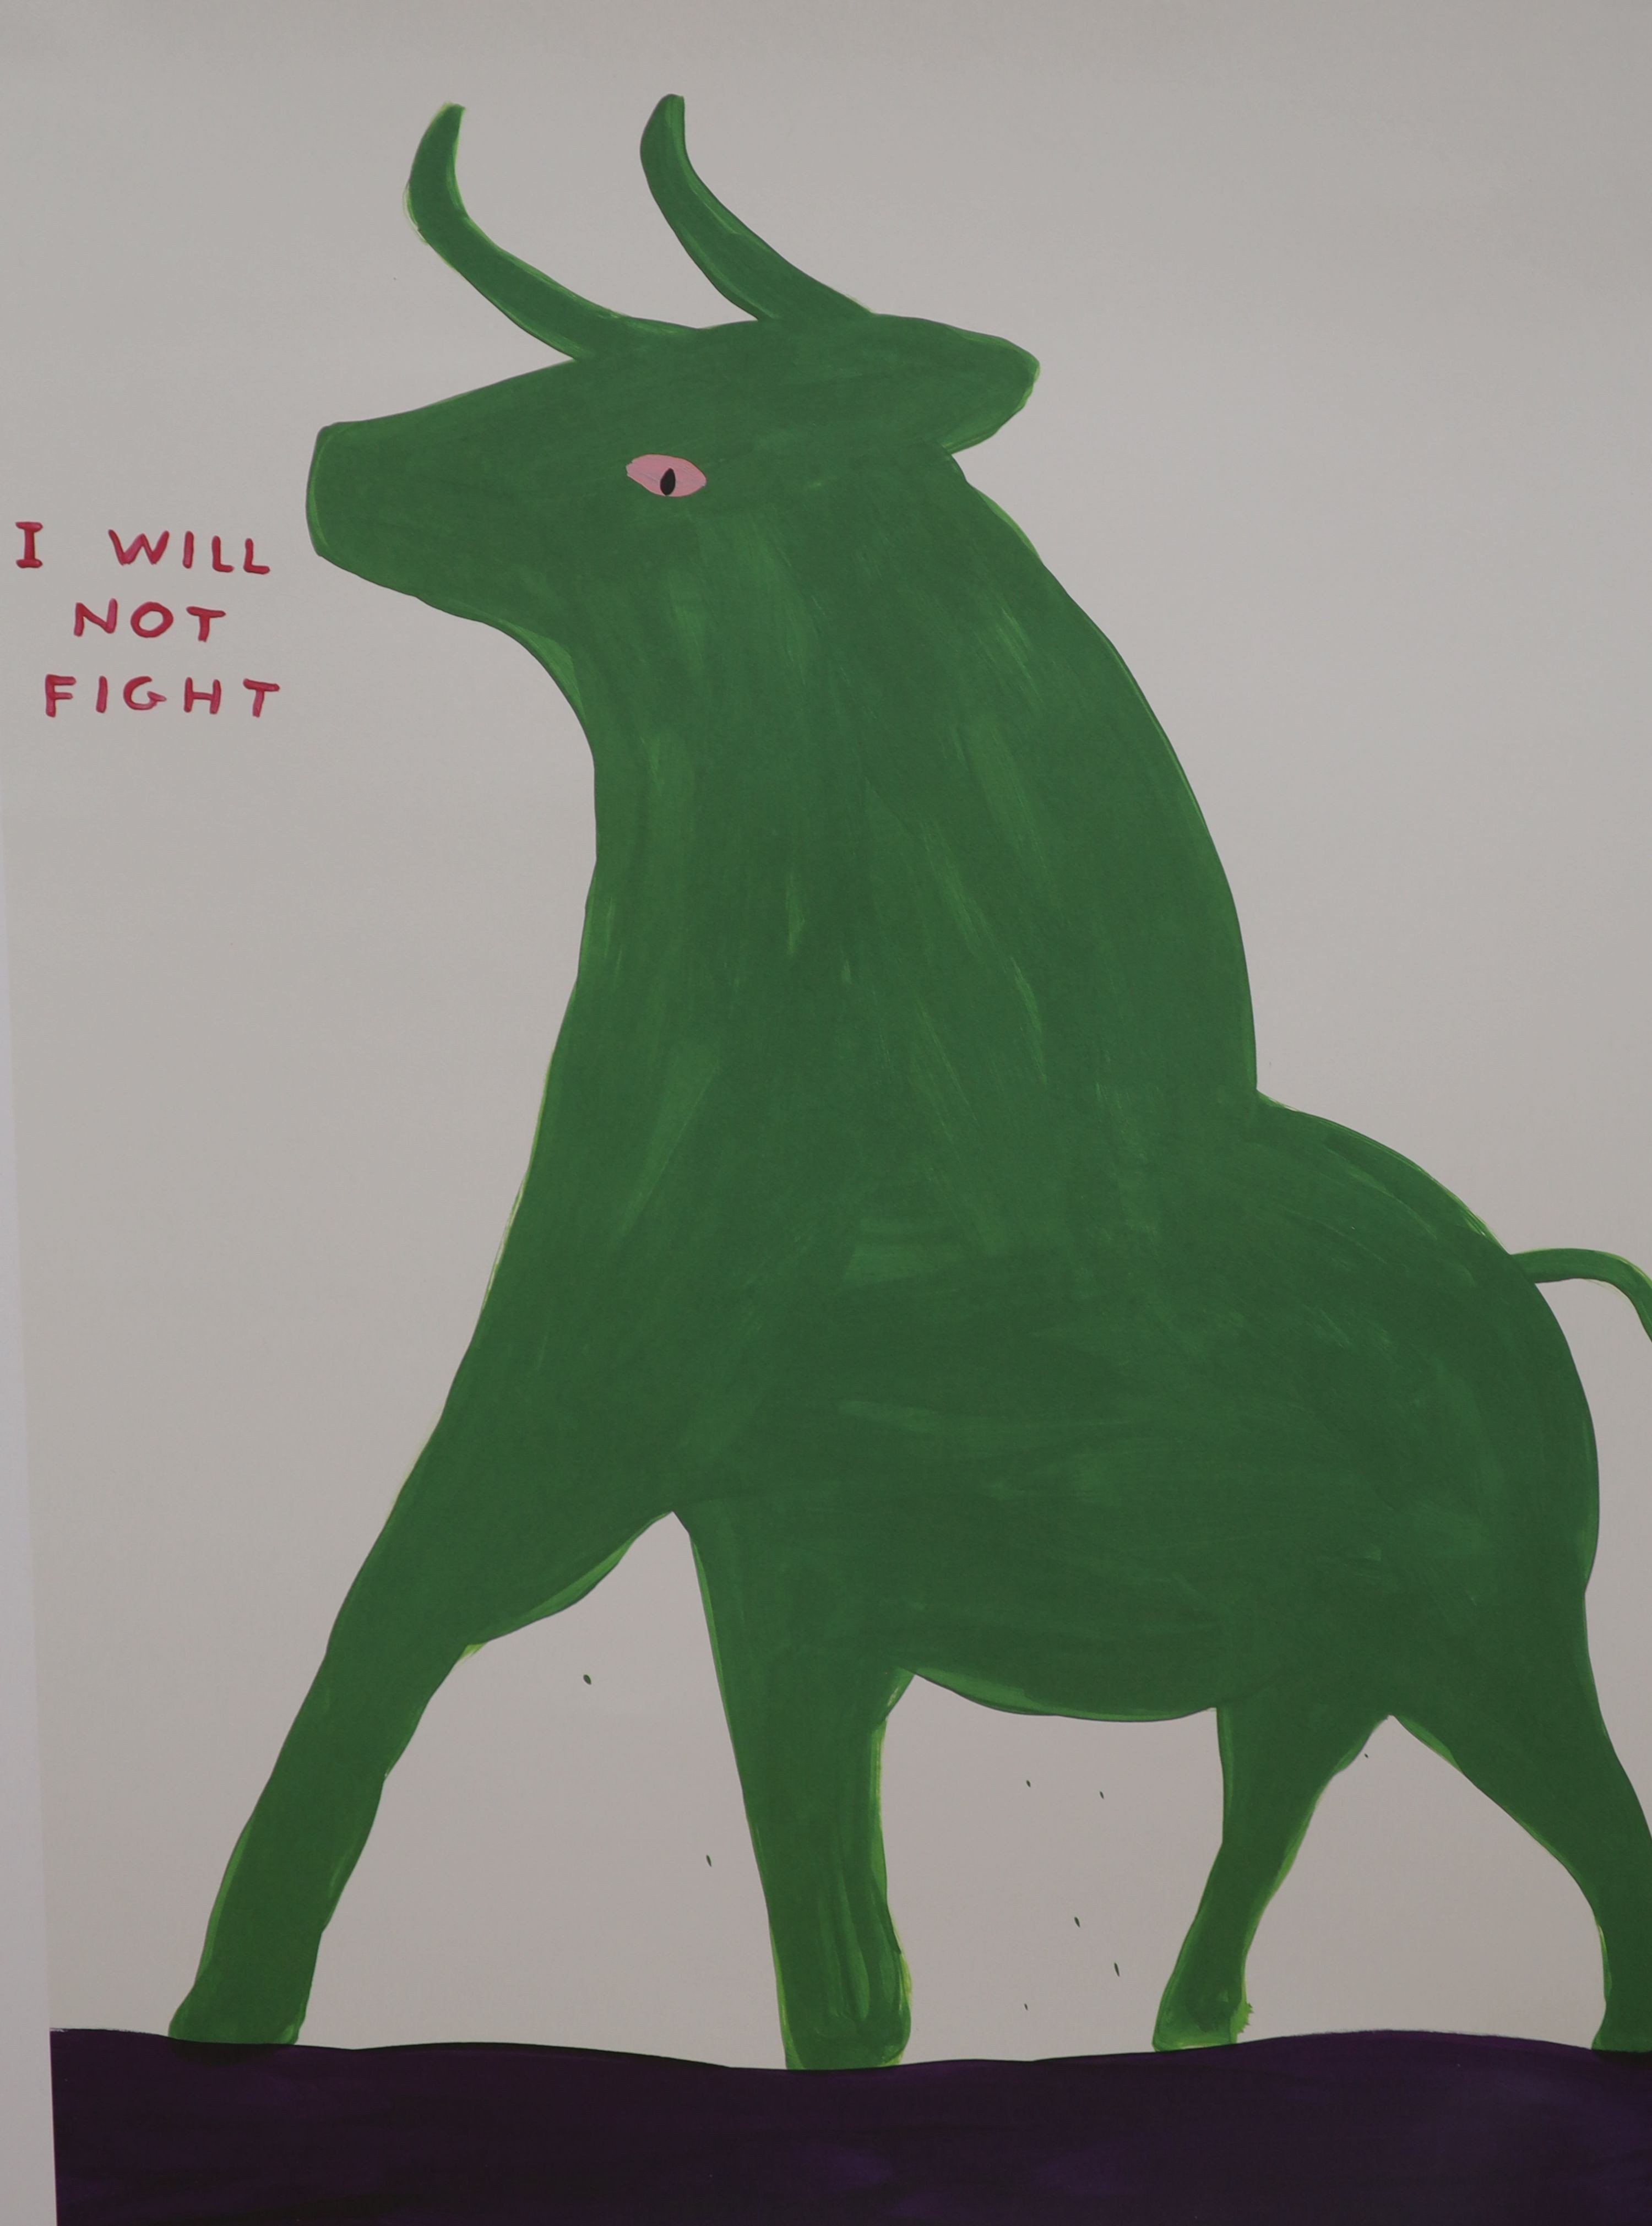 David Shrigley (1968-), offset lithographic poster, 'I Will Not Fight', 2020, 80 x 60cm, unframed.